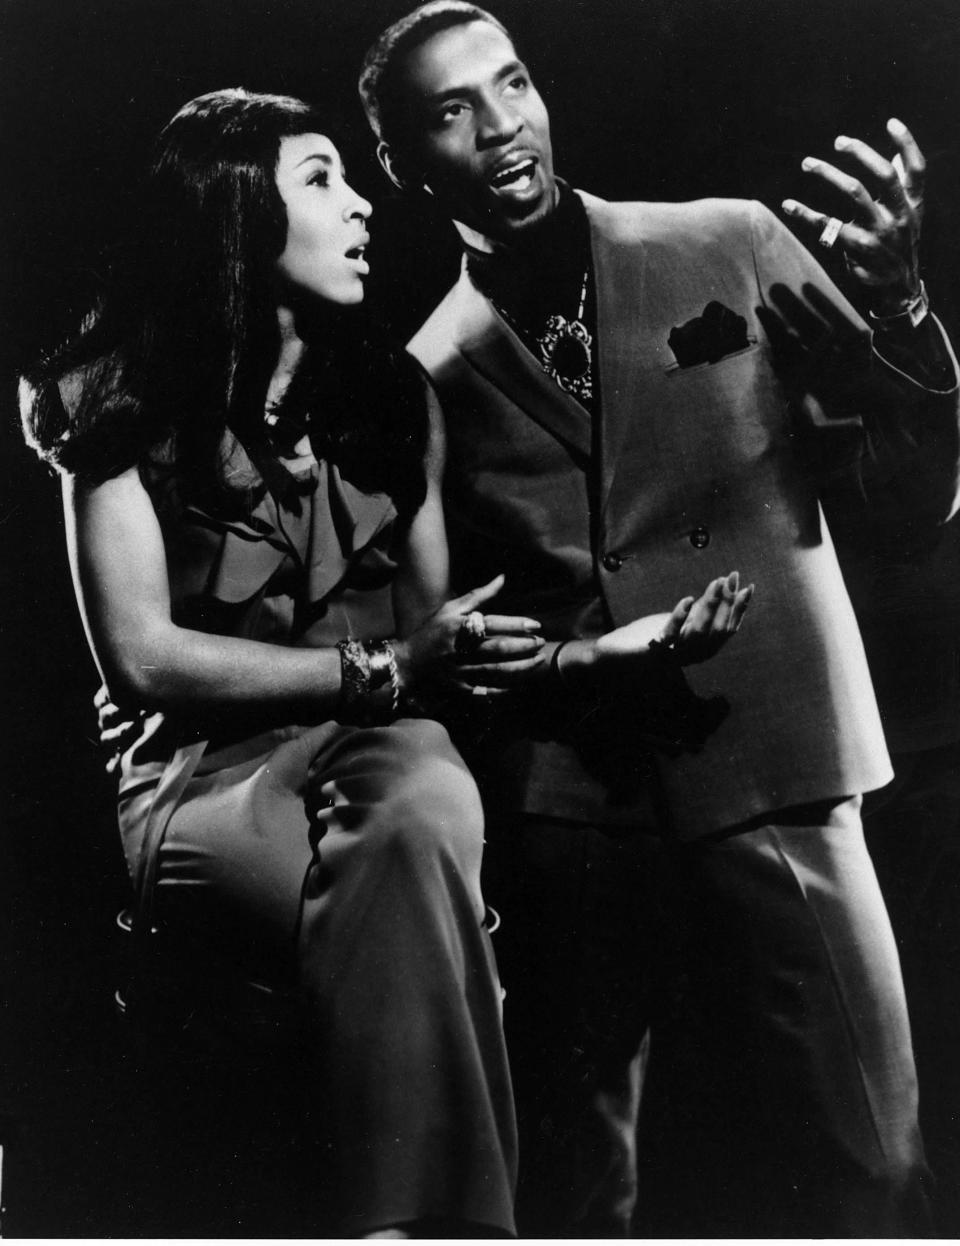 This undated file photo shows R&B singers Tina and Ike Turner. The pair performed multiple times in Pensacola at clubs in the historic Belmont-DeVilliers neighborhood in the 1960s and '70s.